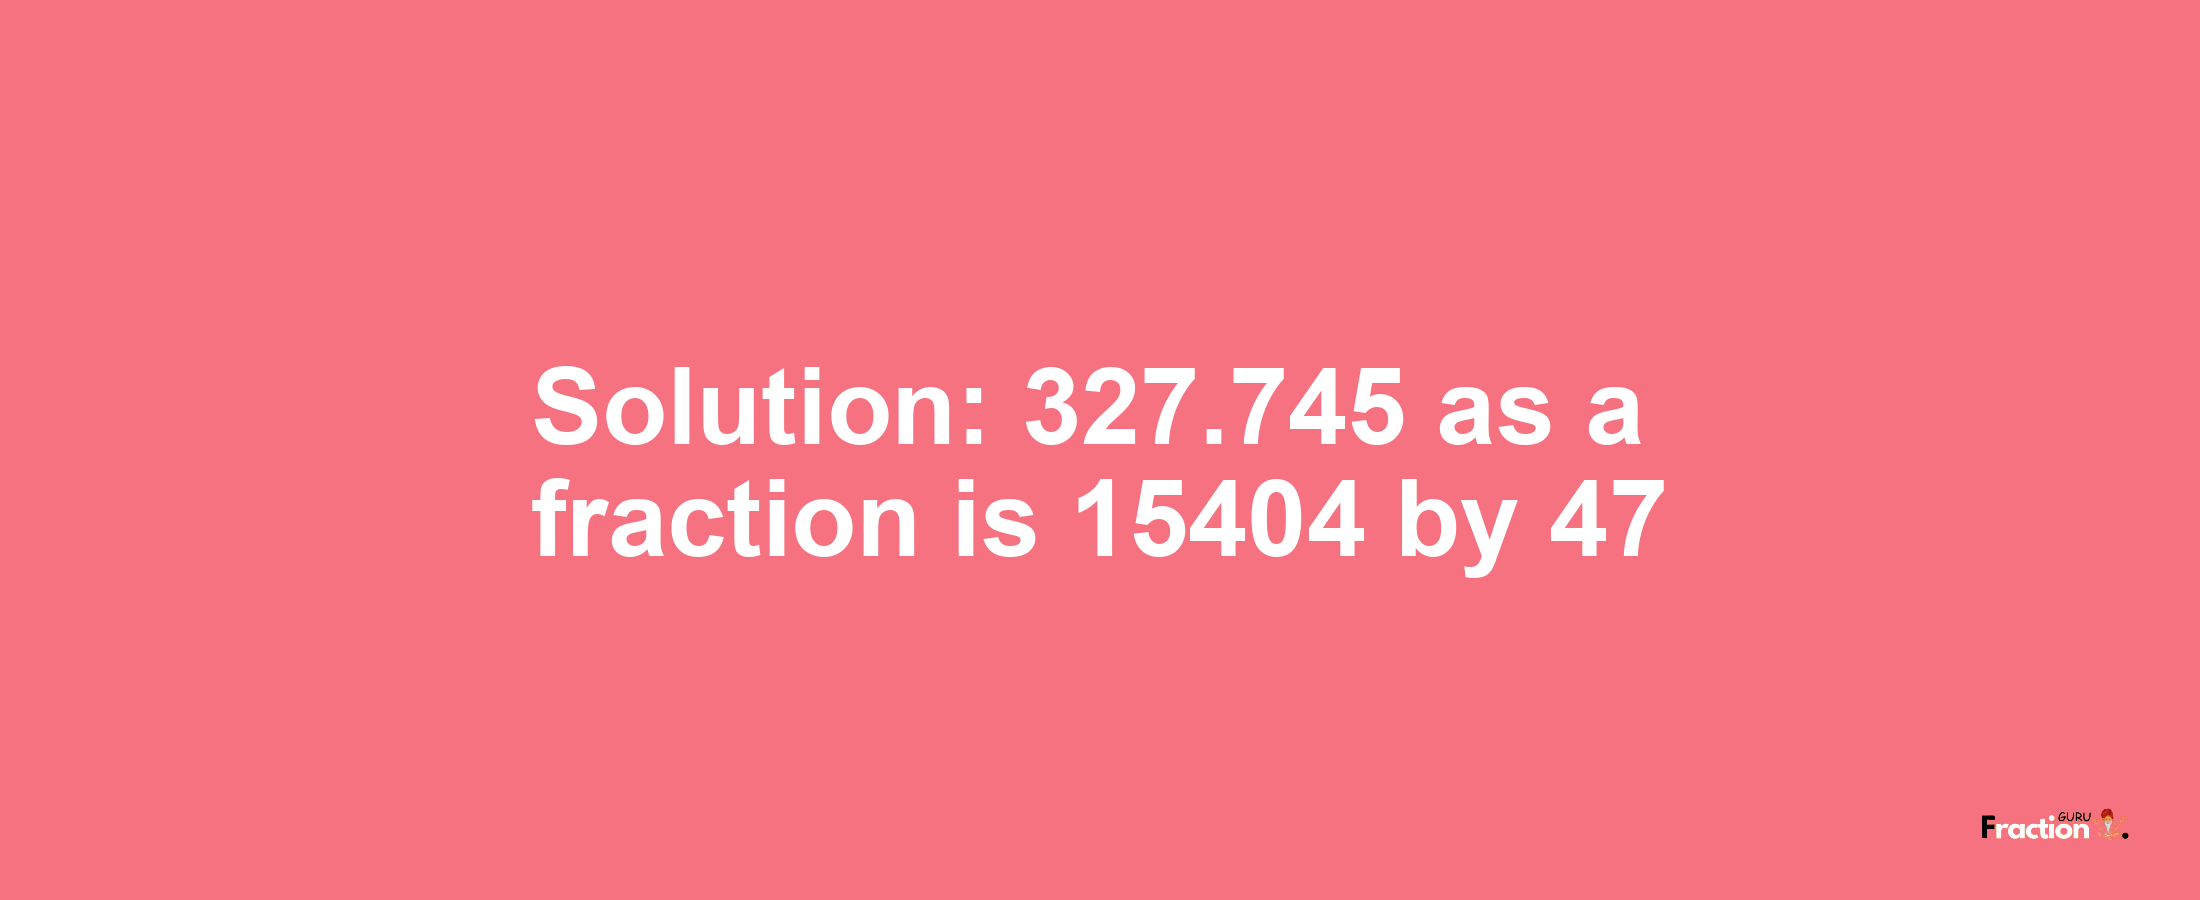 Solution:327.745 as a fraction is 15404/47